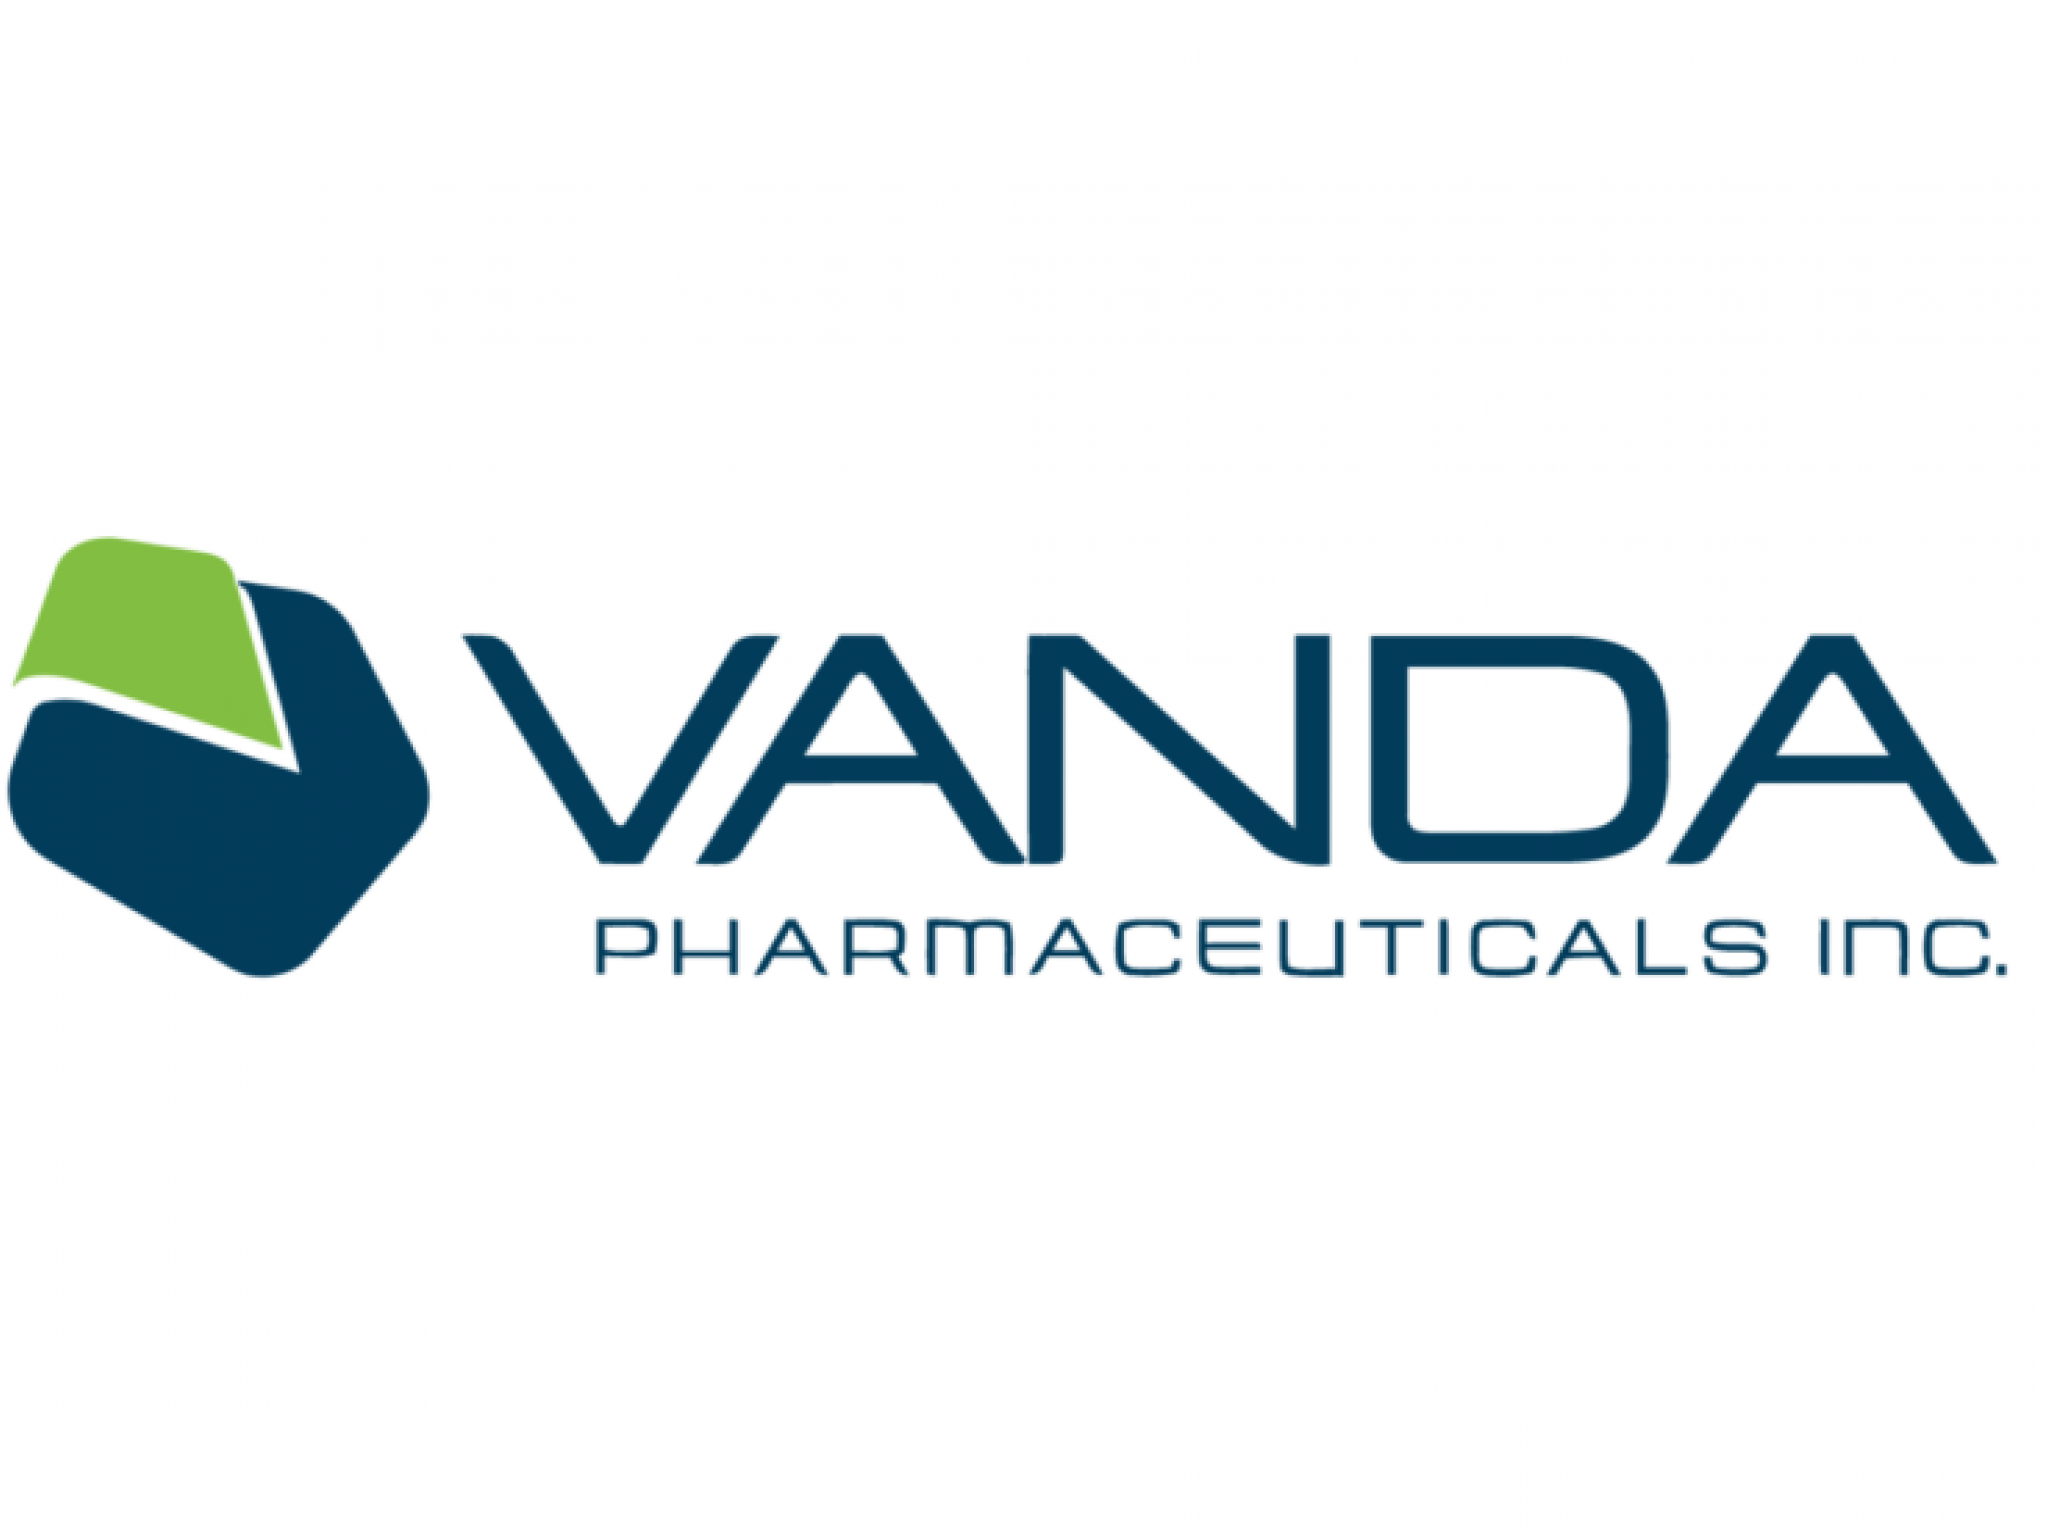  neuropsychiatric-focused-vanda-pharmaceuticals-rejects-future-paks-takeover-bid-valued-up-to-775share 